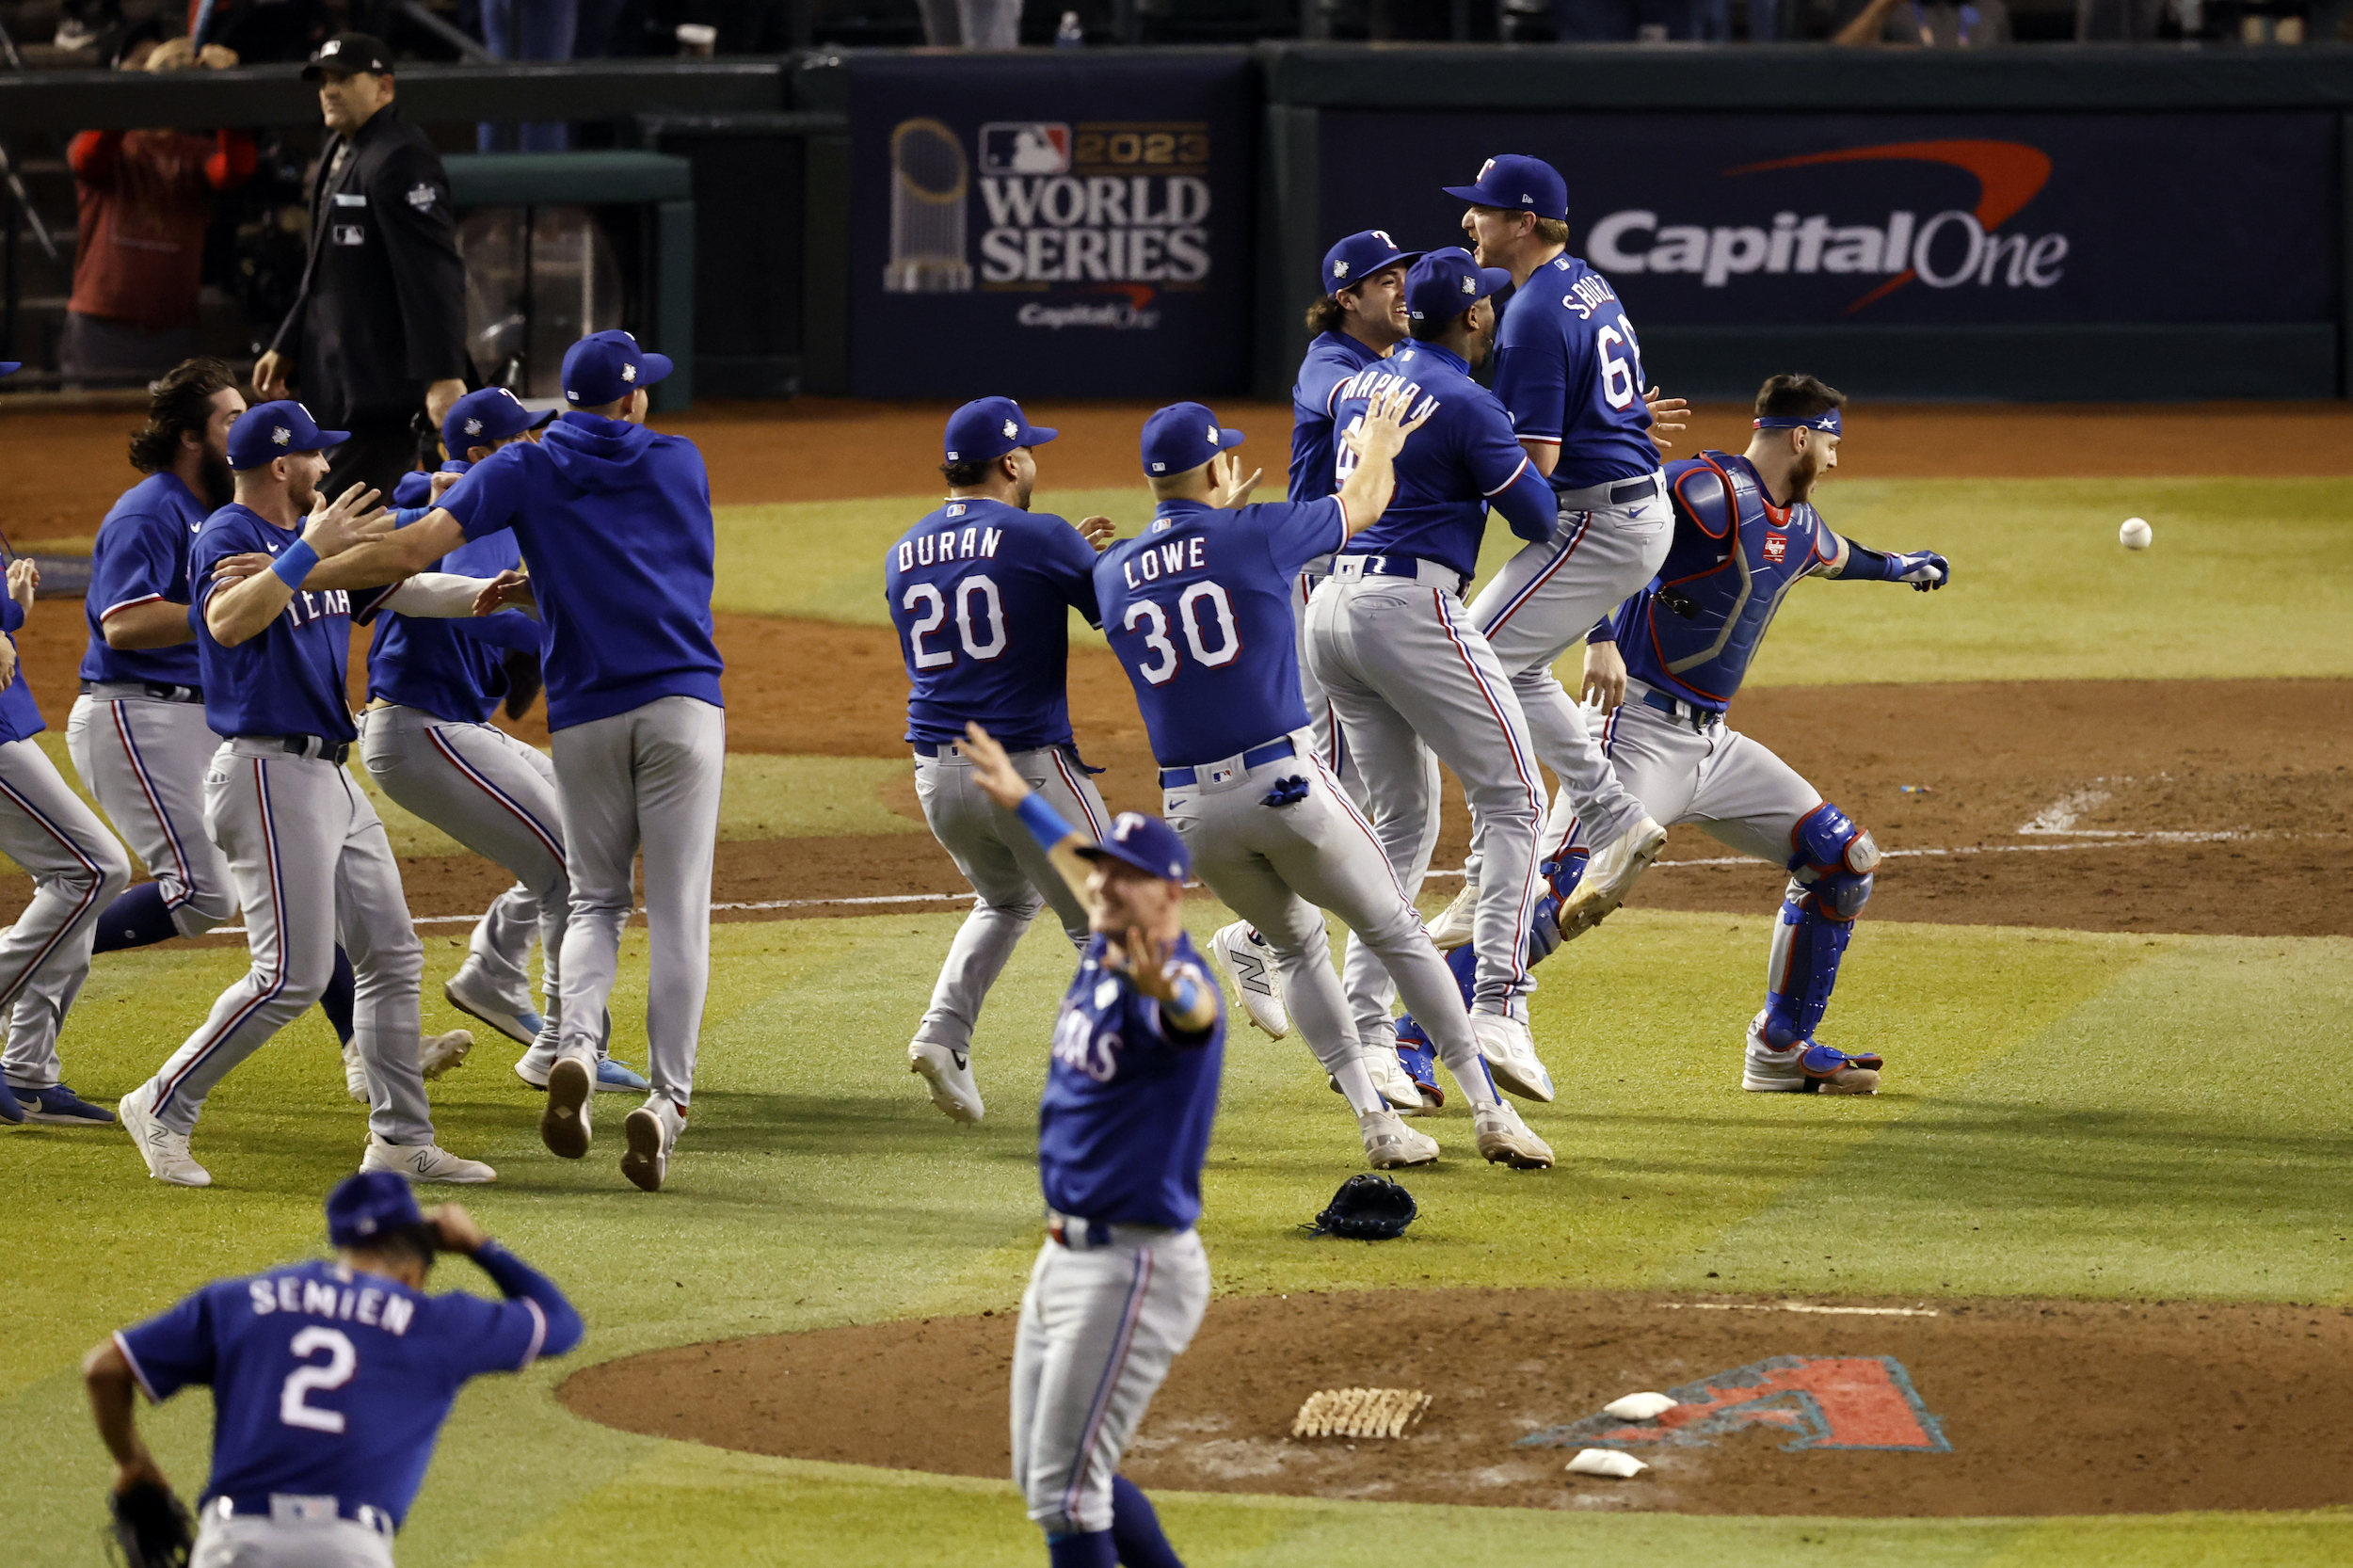 The Texas Rangers celebrate on the field after winning the World Series.